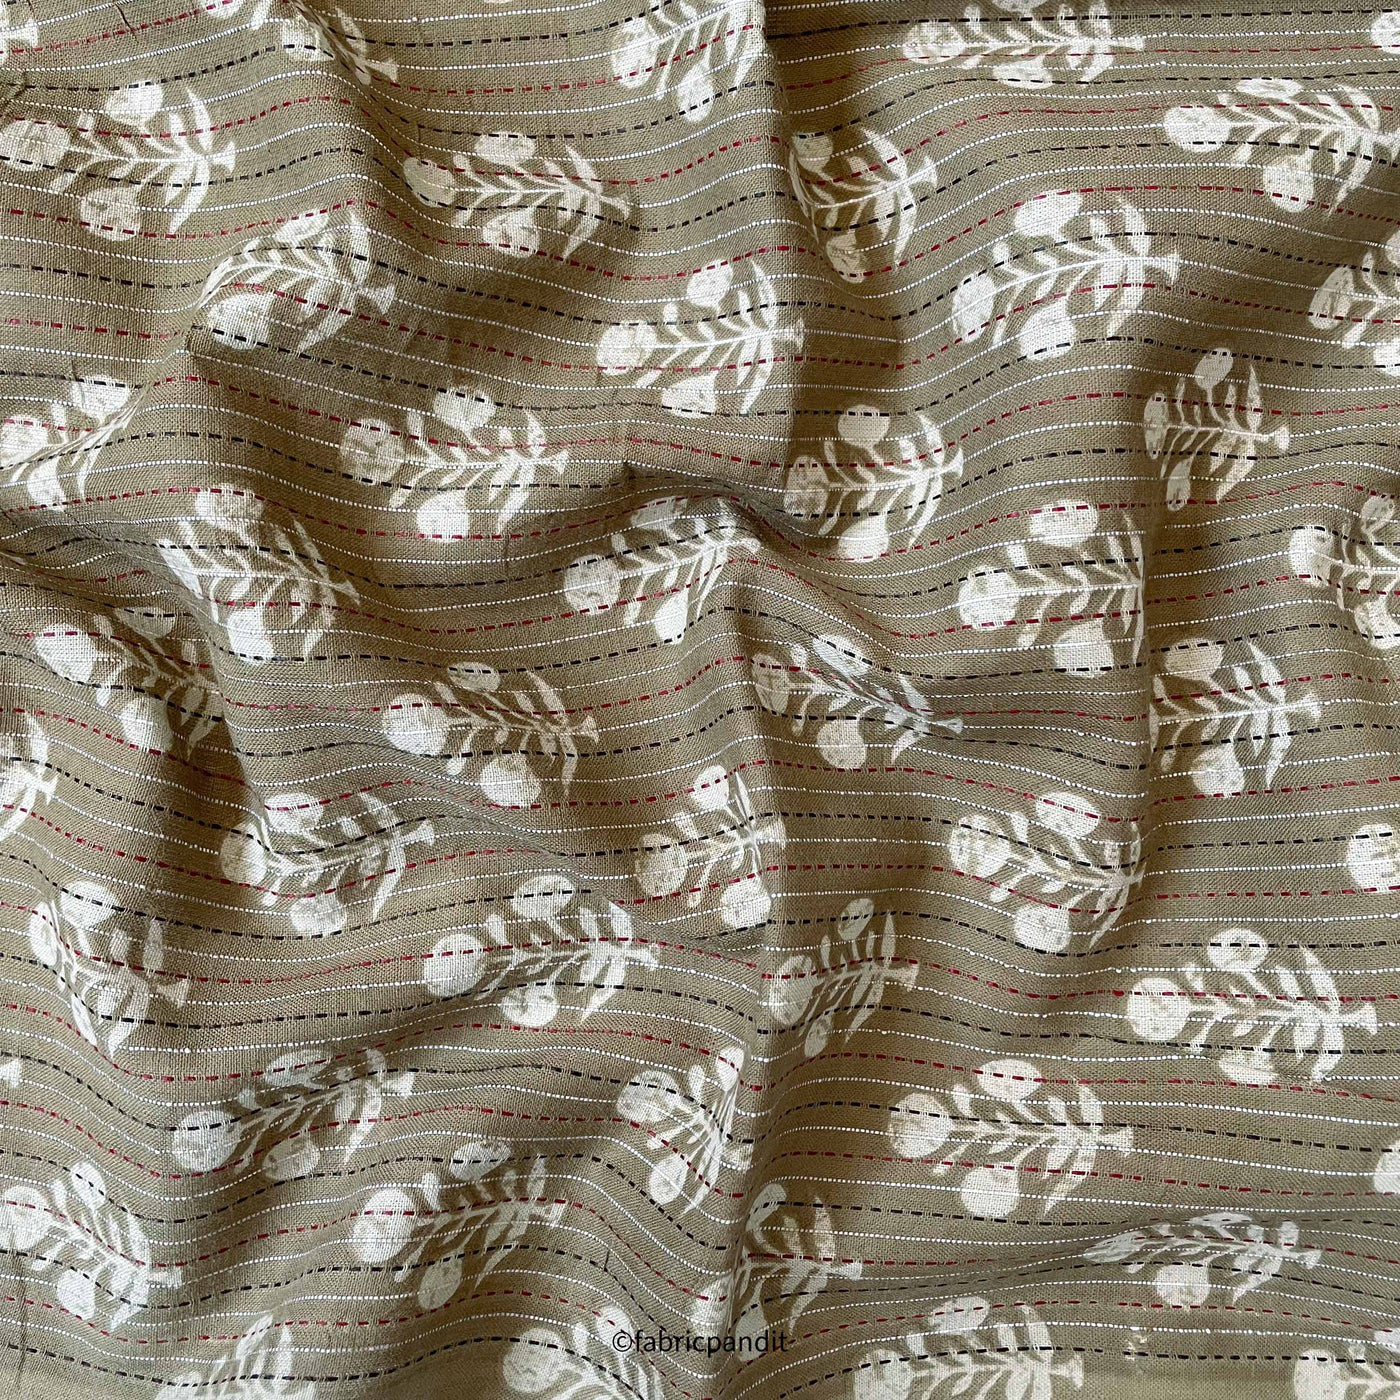 Fabric Pandit Fabric Dusty Grey Abstract Floral Woven Kantha Hand Block Printed Pure Cotton Fabric (Width 42 inches)